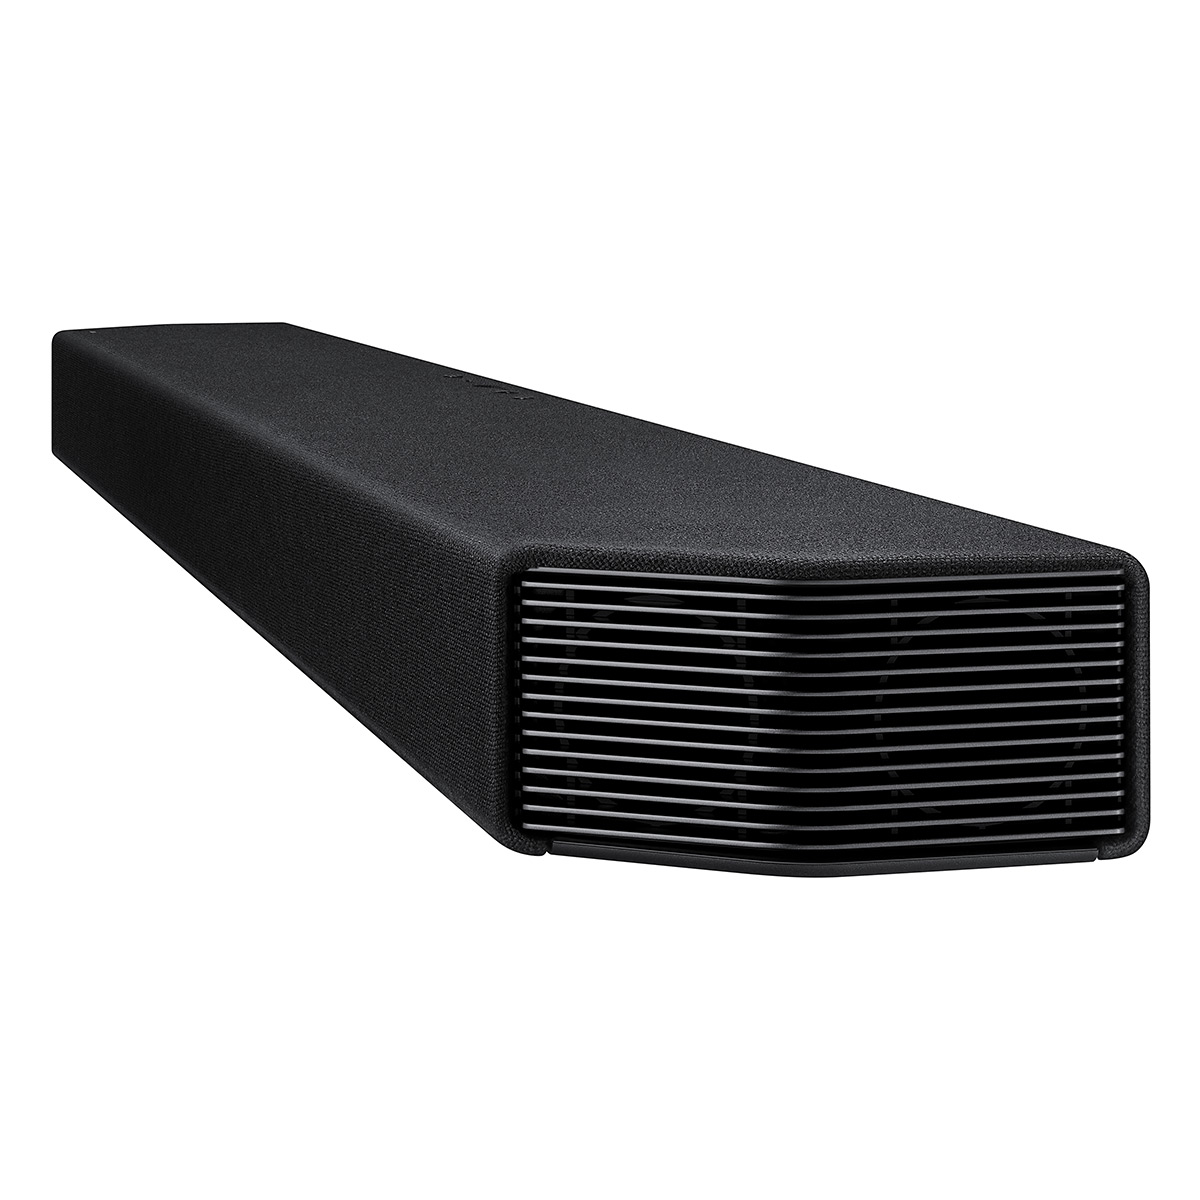 Samsung HW-Q950A 11.1.4ch Soundbar with Dolby Atmos and DTS:X - image 5 of 12